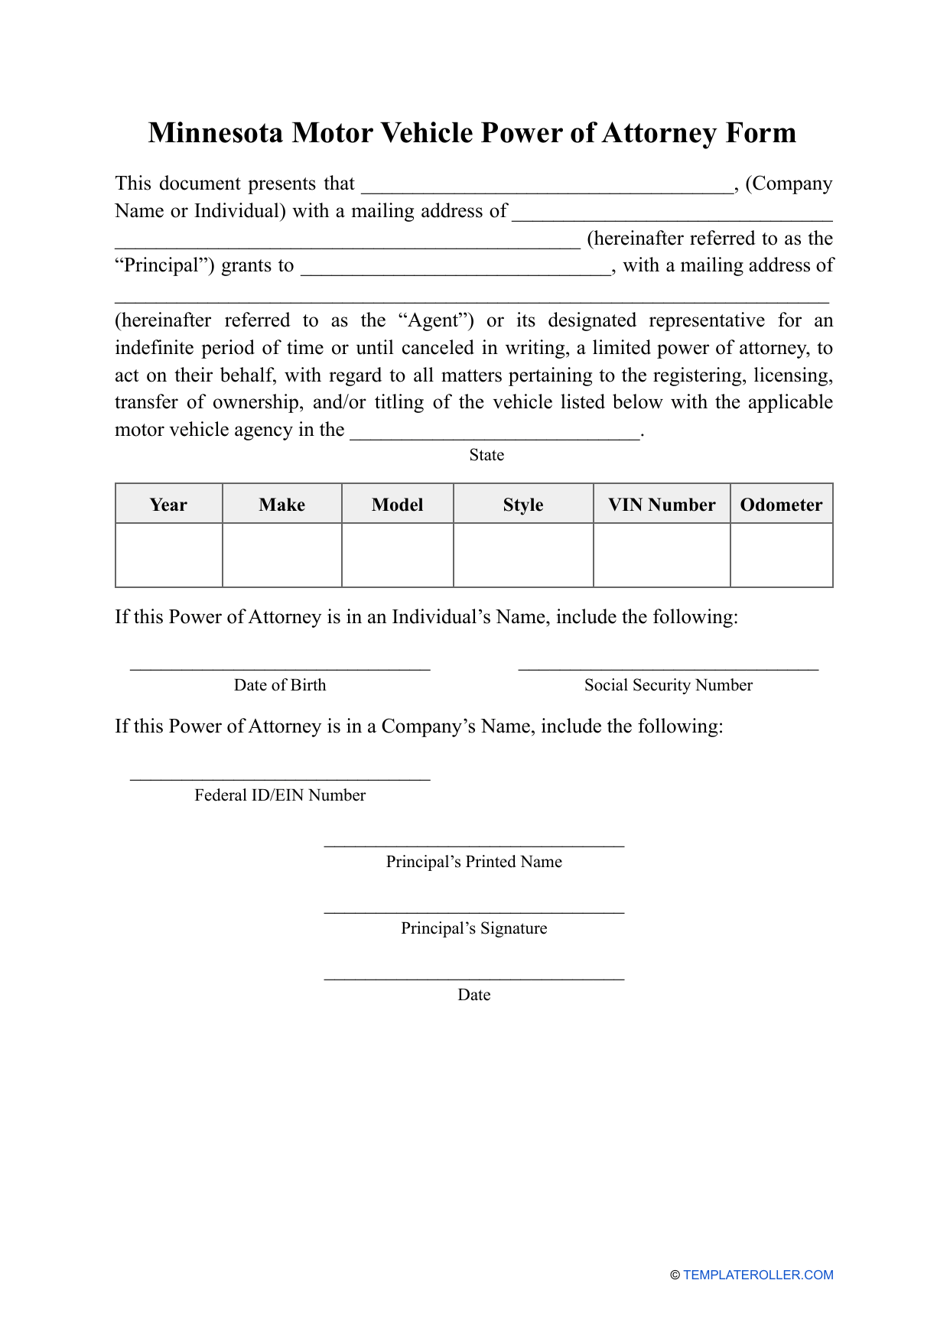 Motor Vehicle Power of Attorney Form - Minnesota, Page 1